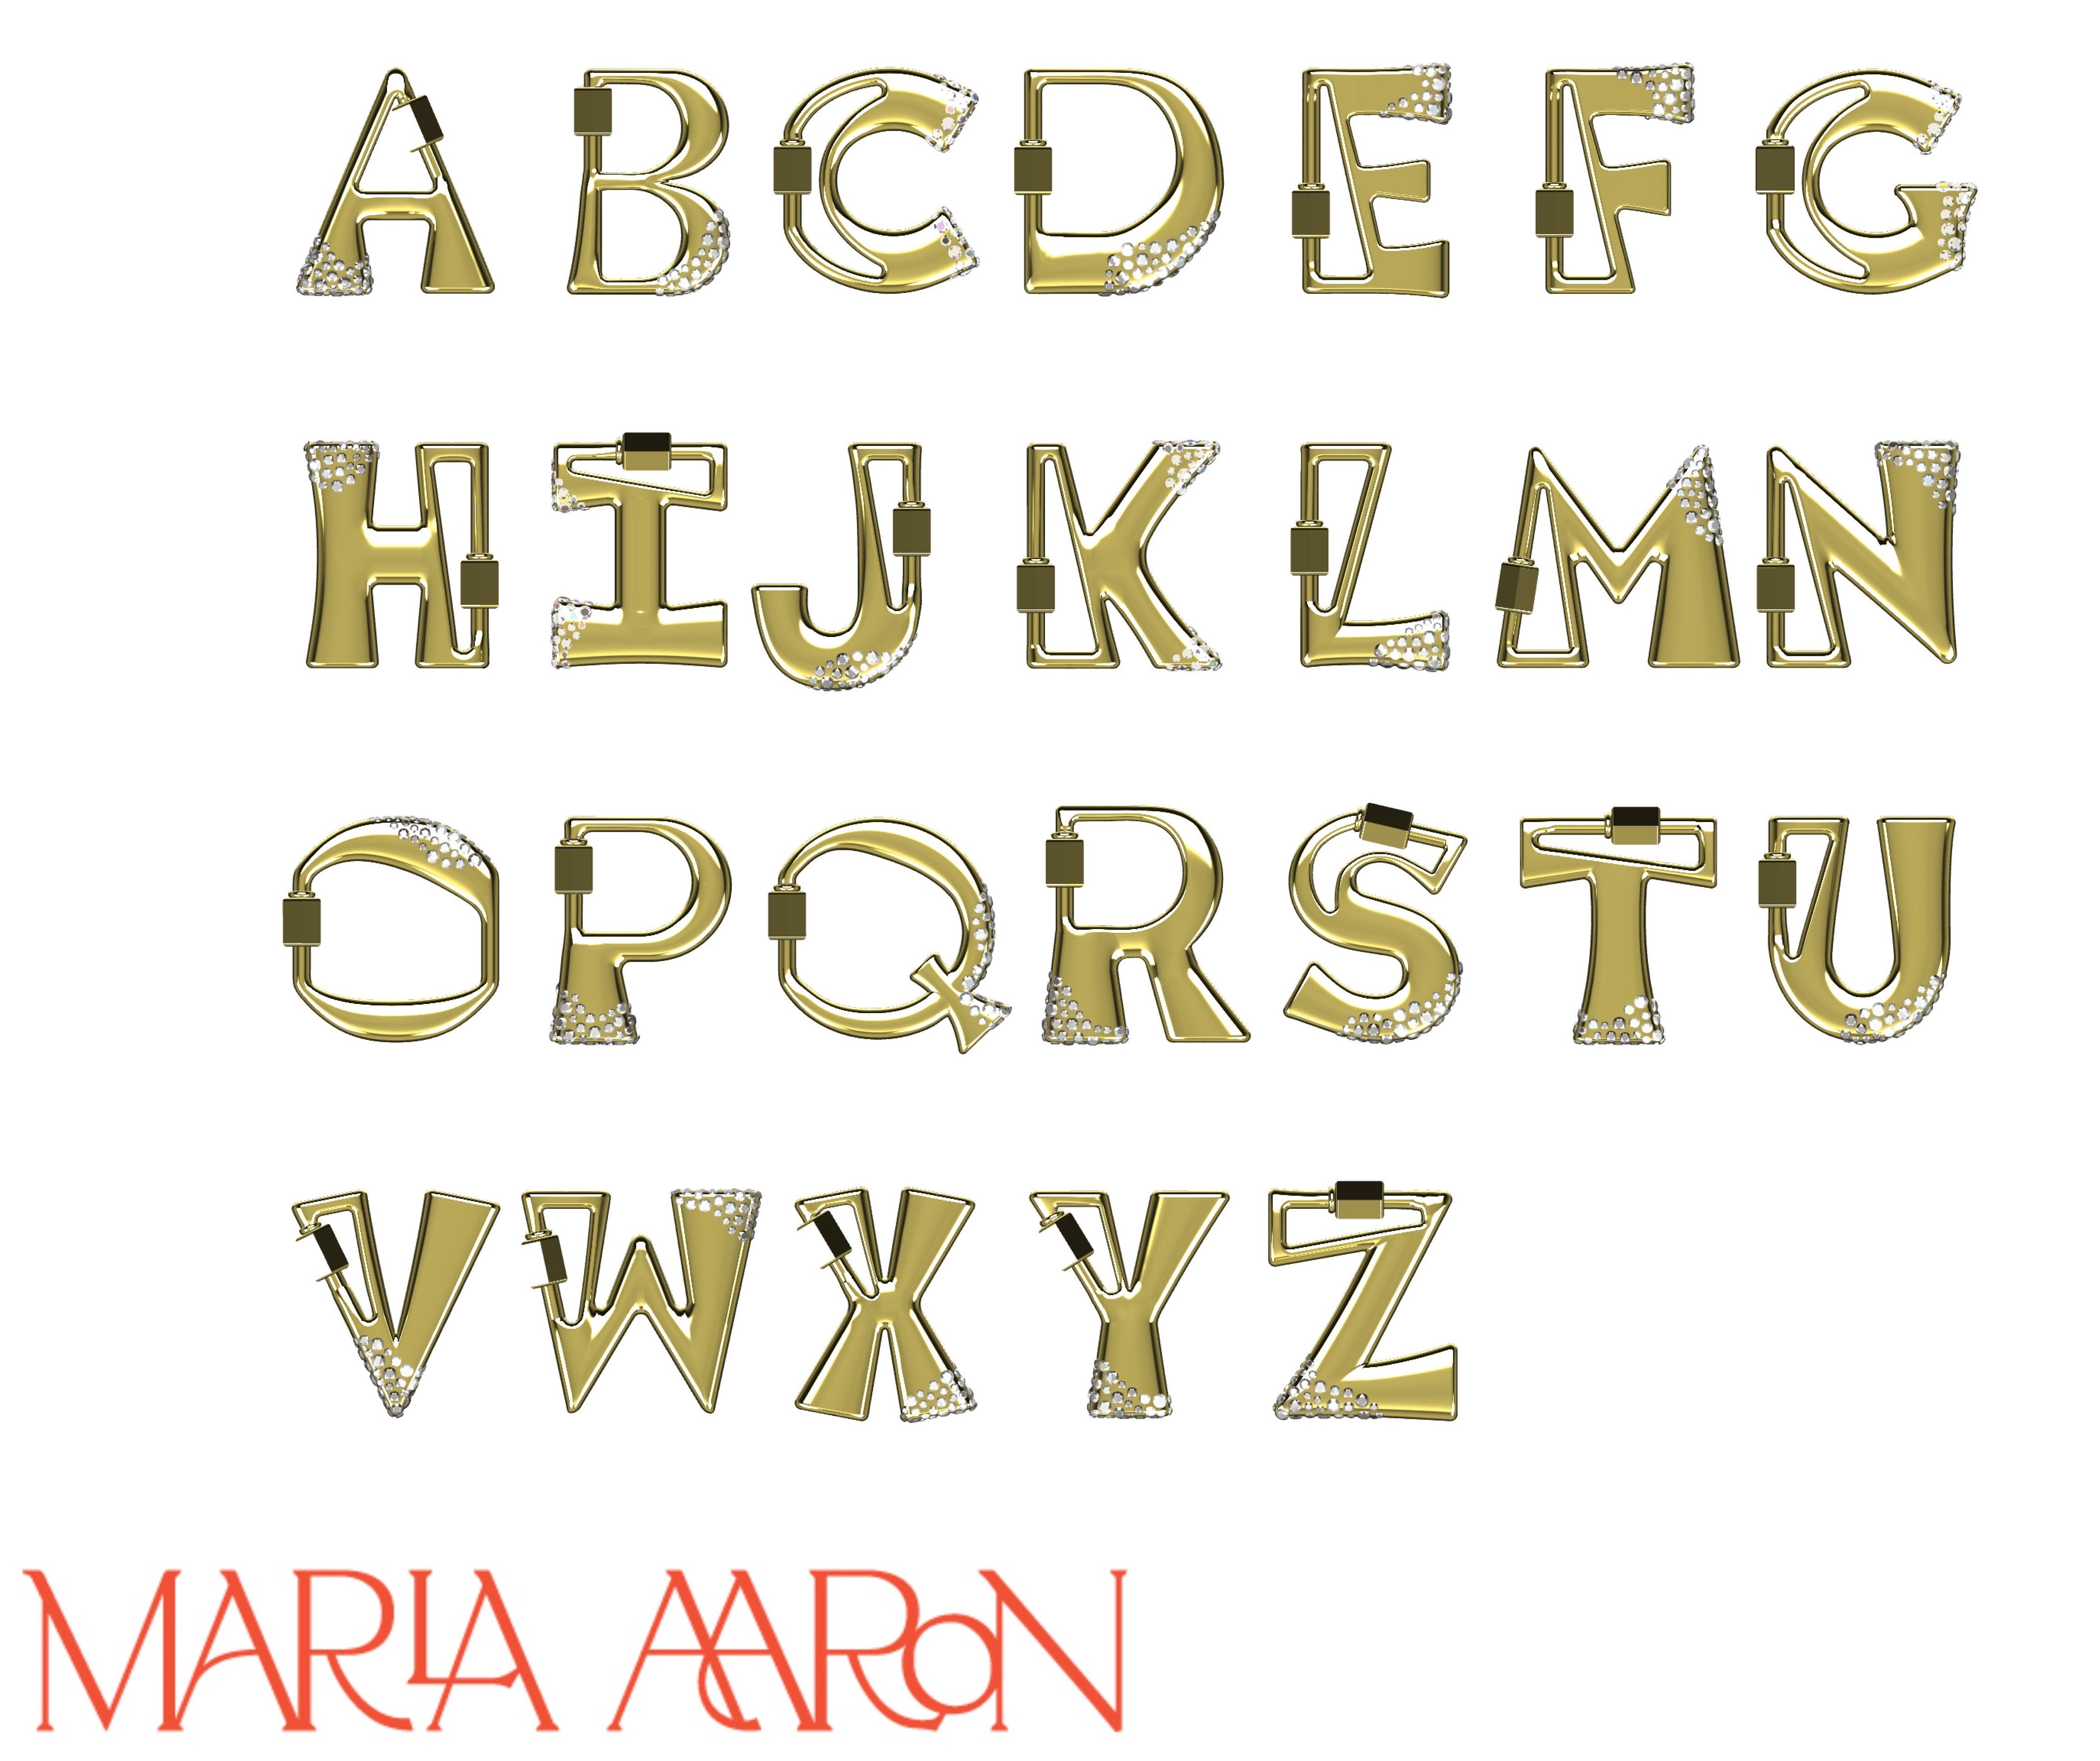 Gold locks of every letter of the alphabet including S charm against white backdrop with Marla Aaron logo in bottom left corner